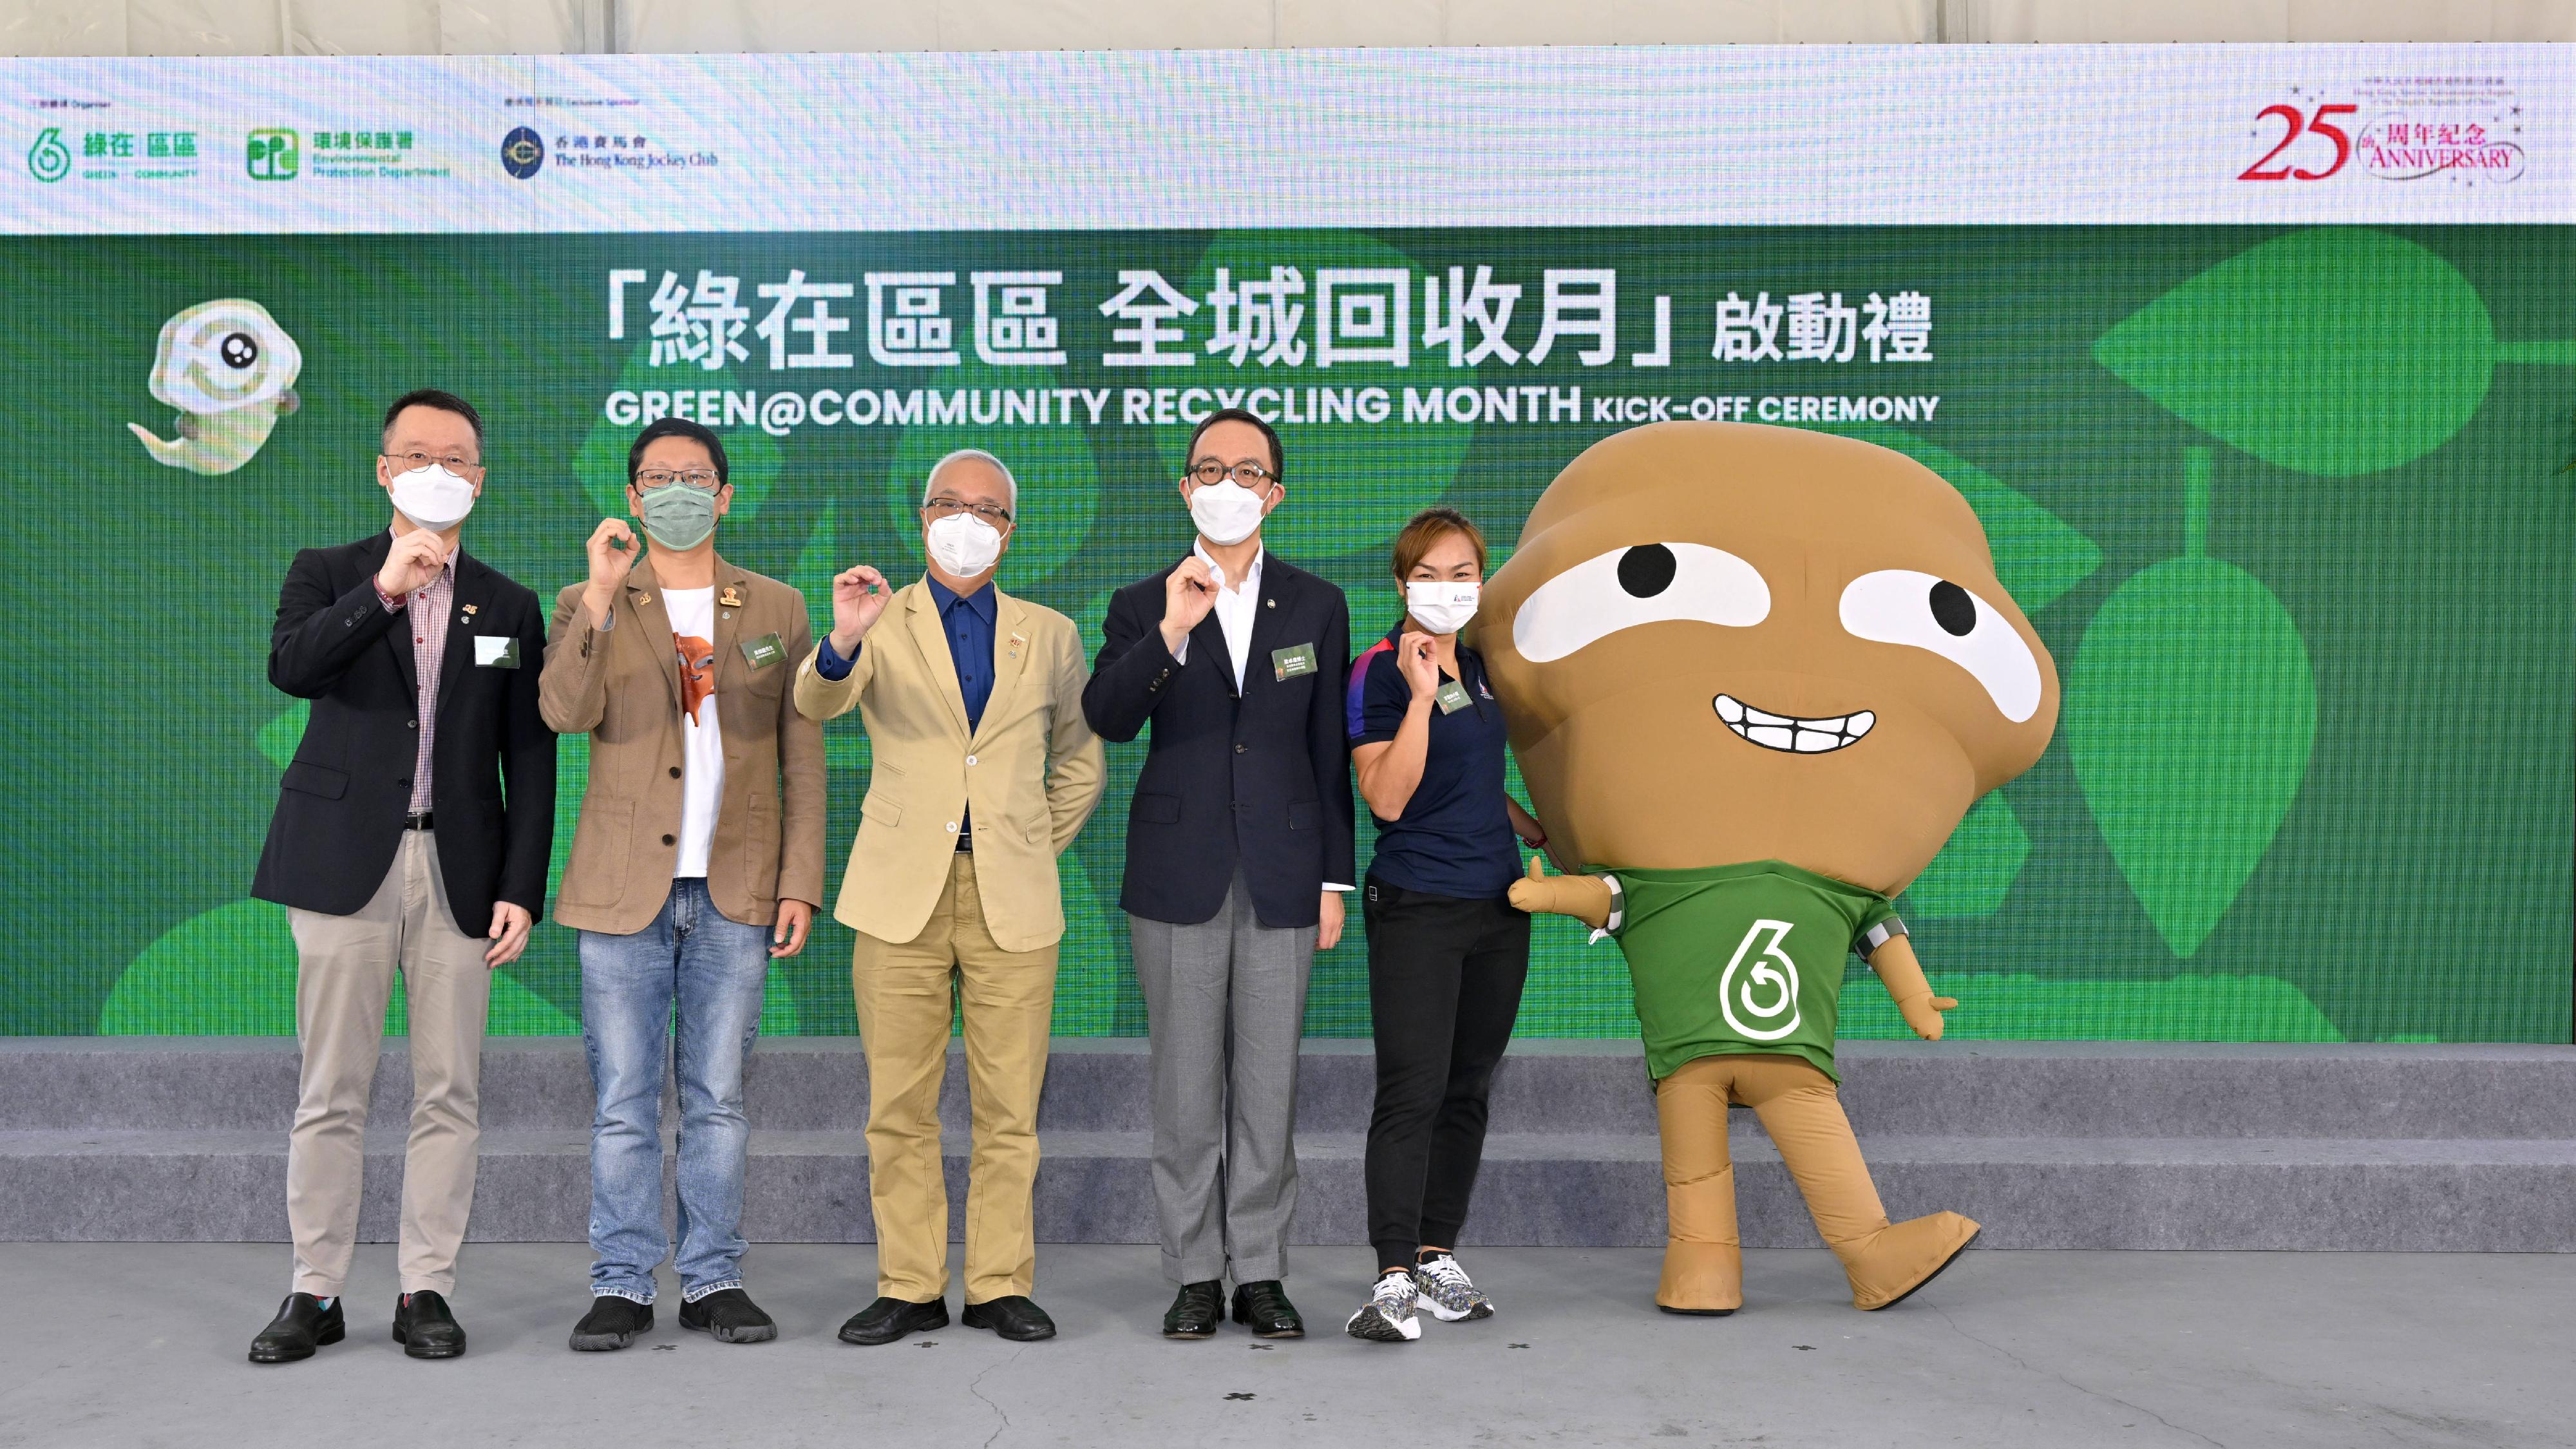 The Kick-off Ceremony of GREEN@COMMUNITY Recycling Month organised by the Environmental Protection Department was held at the Recycling Station GREEN@KWUN TONG today (November 26). Officiating guests included the Secretary for Environment and Ecology, Mr Tse Chin-wan (centre); the Chairman of the Environmental Campaign Committee, Mr Simon Wong (second left); the Executive Director of Charities and Community of the Hong Kong Jockey Club, Dr Gabriel Leung (second right); "Carbon Neutrality" Ambassador Lee Wai-sze (first right); and Deputy Director of Environmental Protection Mr Bruno Luk (first left).